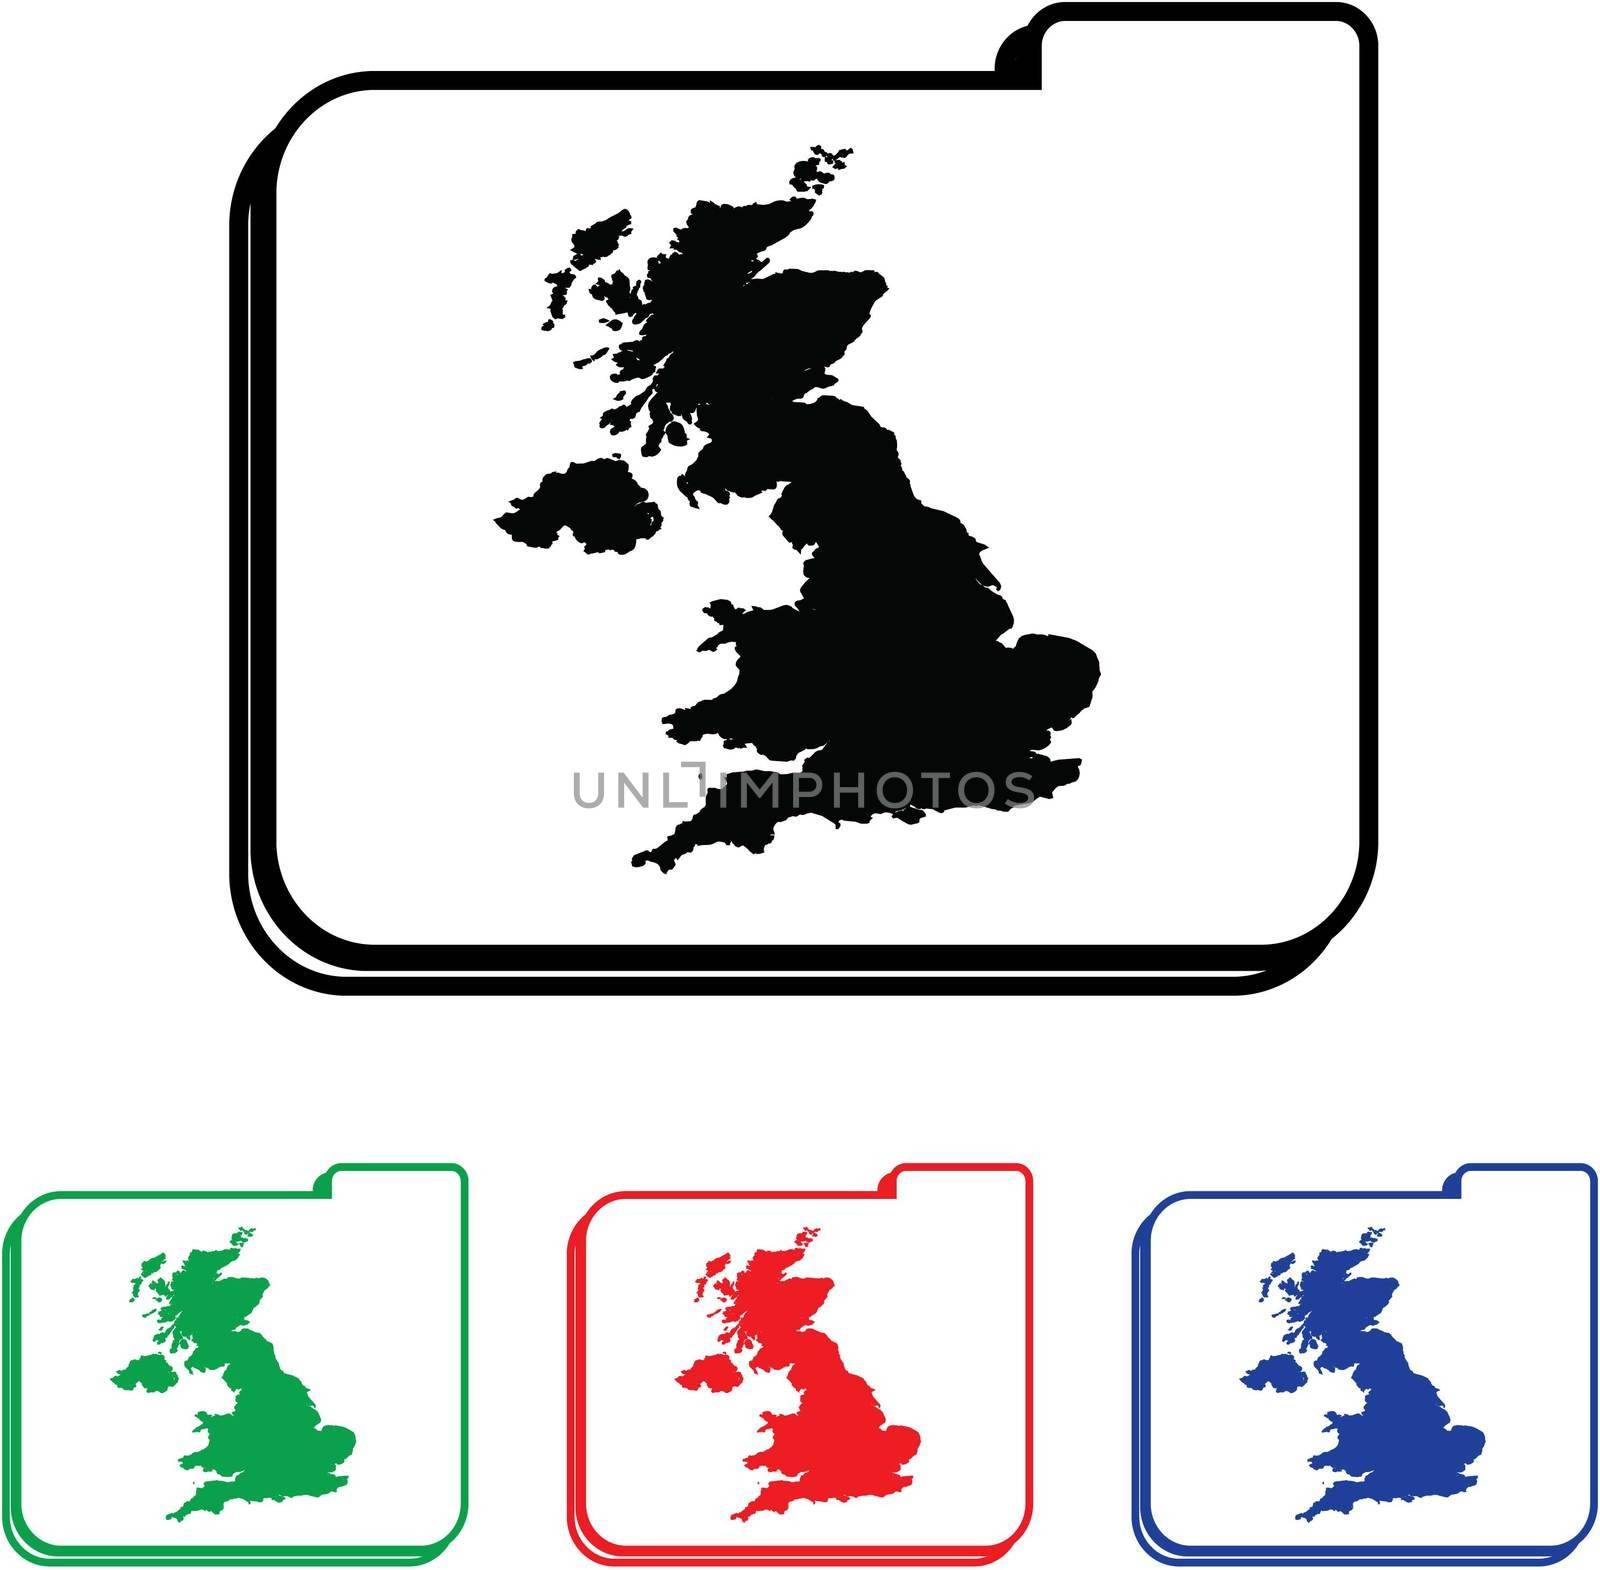 United Kingdom Icon Illustration with Four Color Variations